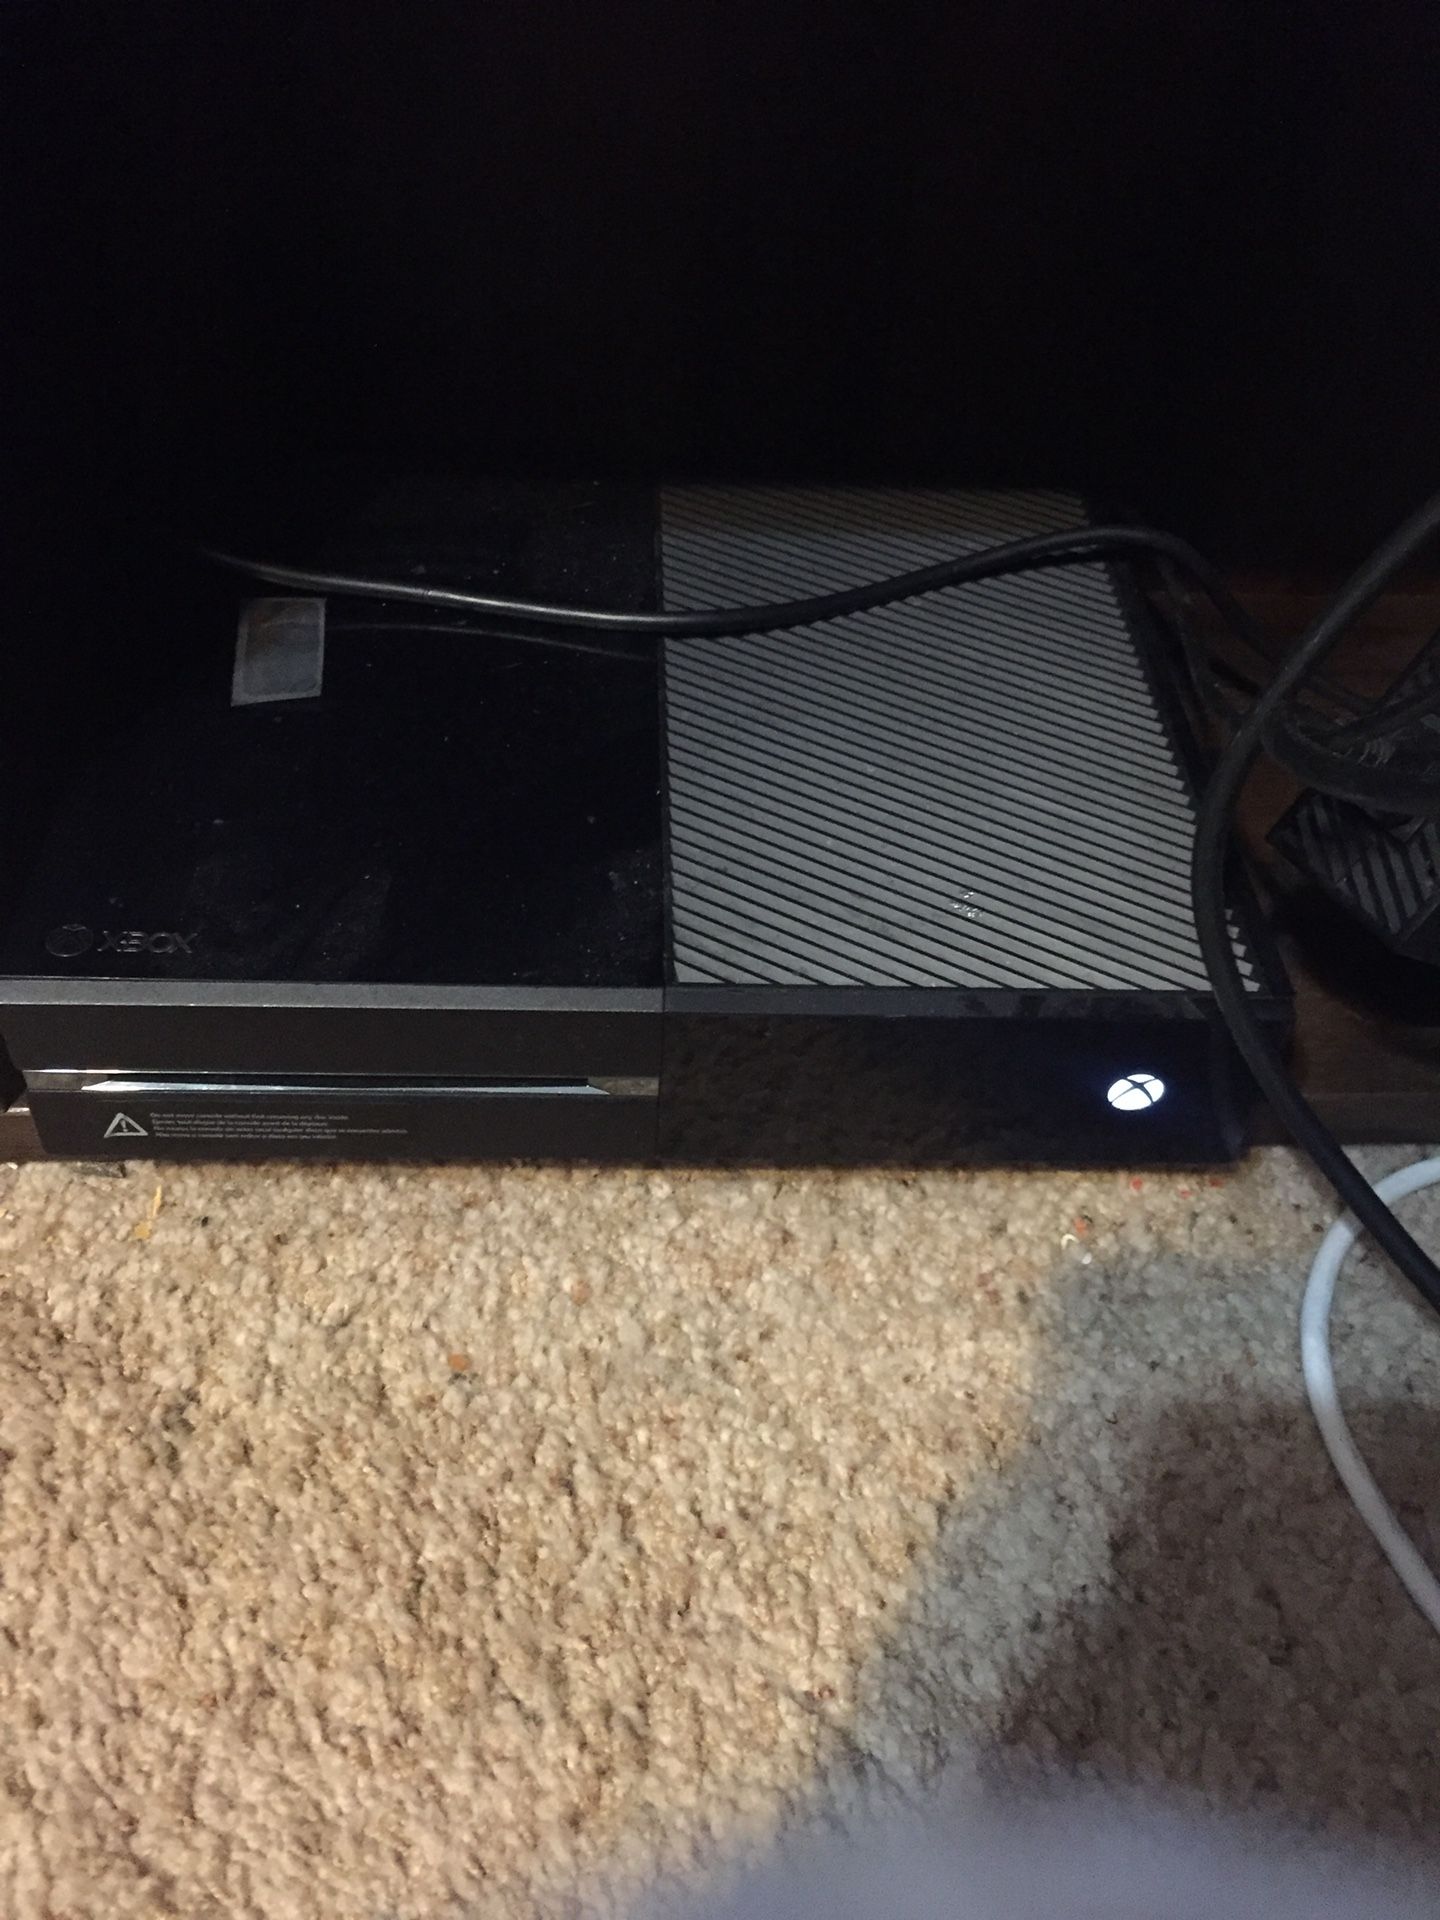 Xbox One with accessories